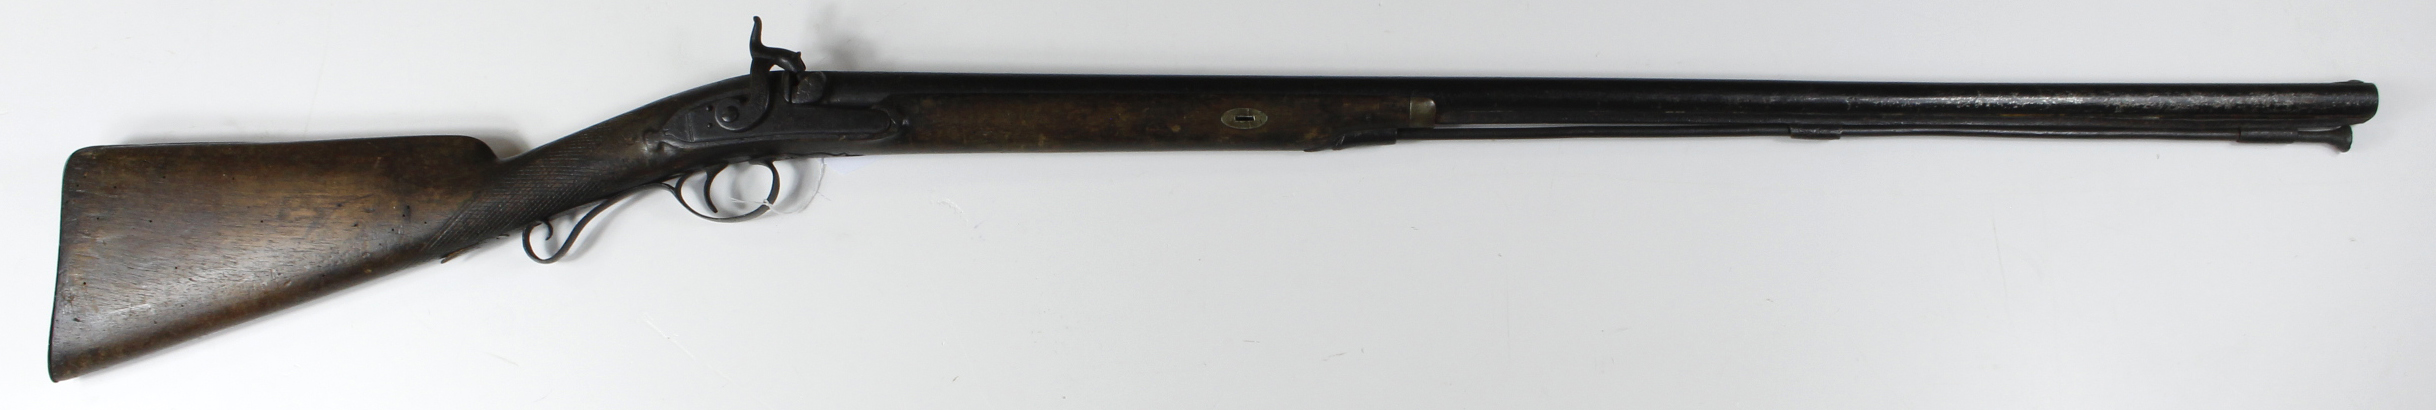 Percussion Rifle with ramrod, lockplate engraved but not readable